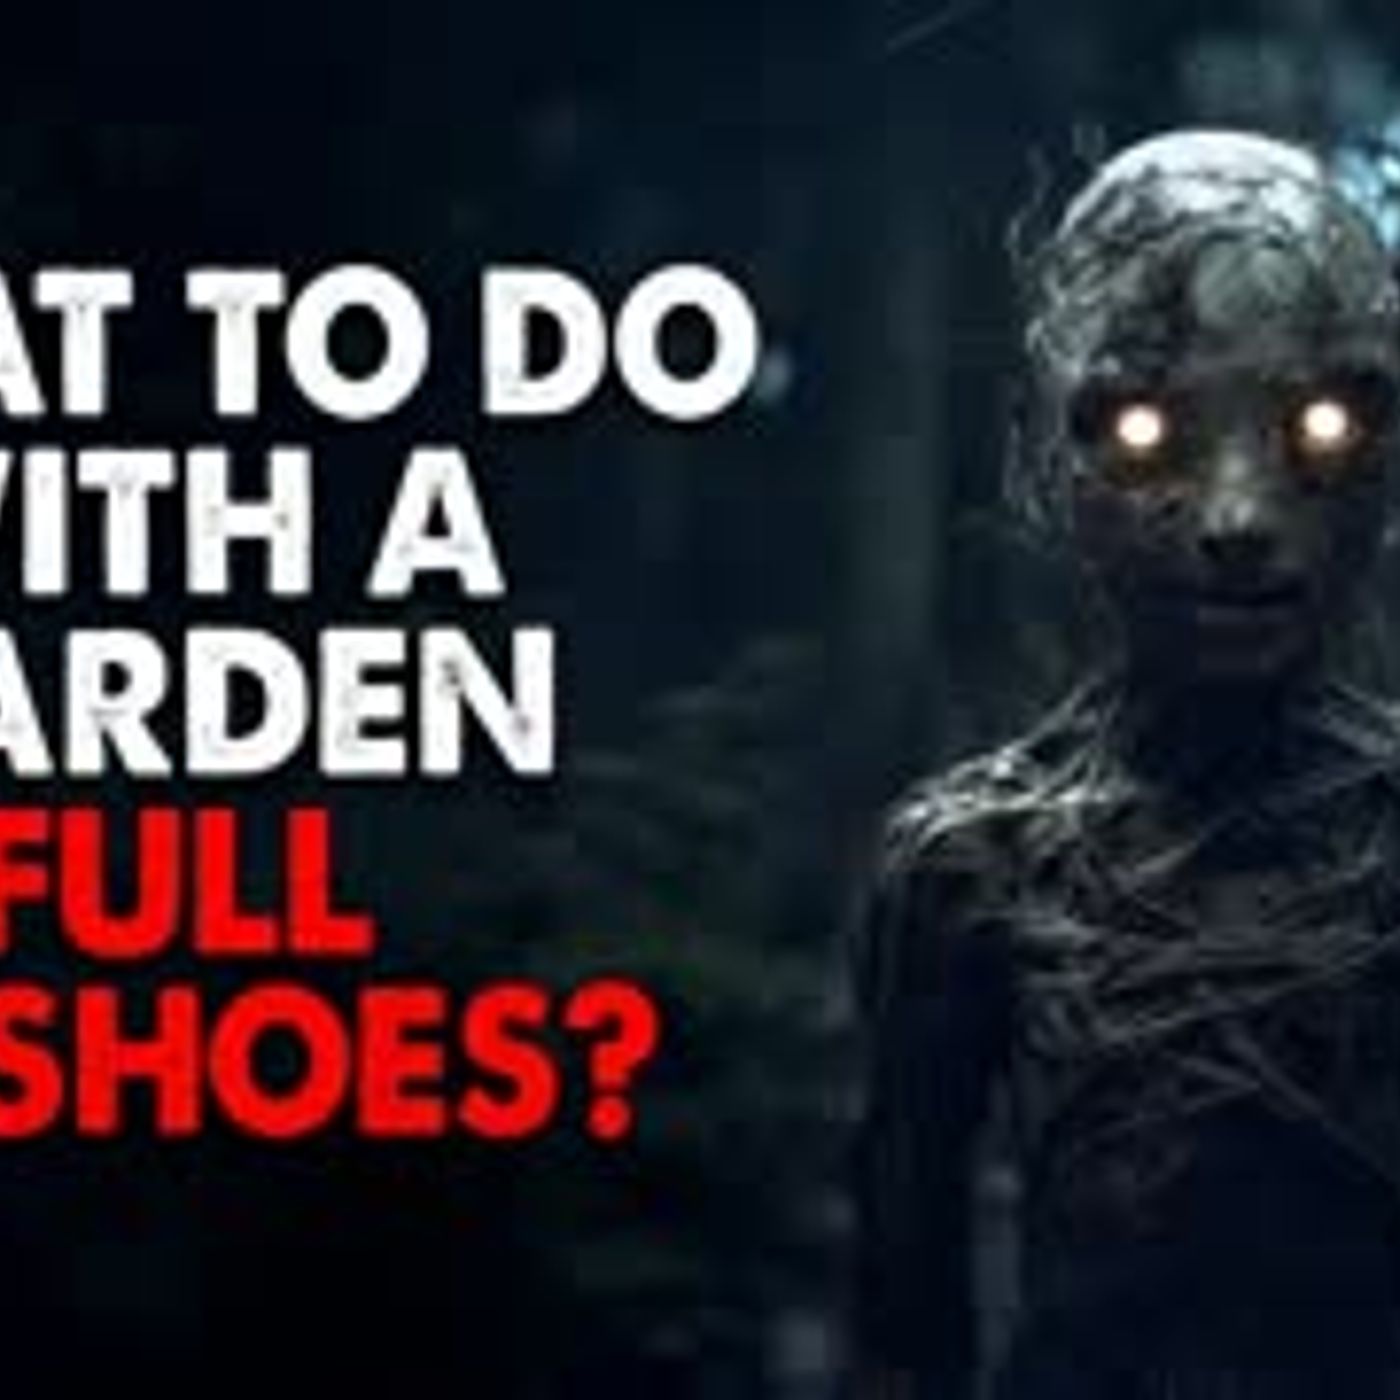 ”What to do with a garden full of shoes?” Creepypasta